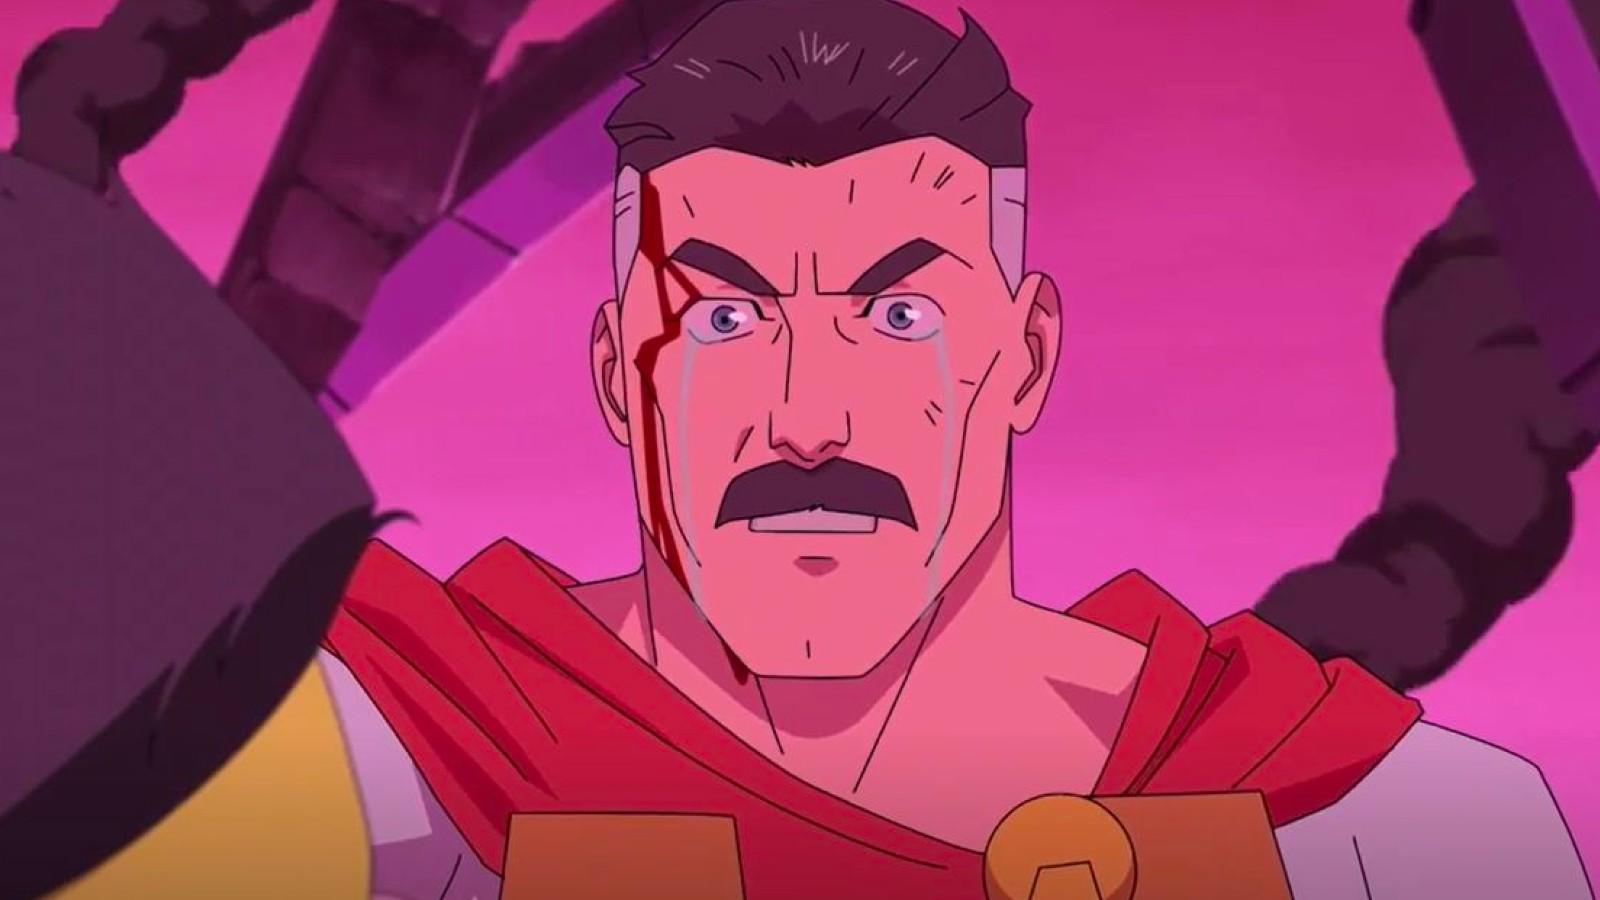 Invincible season 2: Everything we know so far